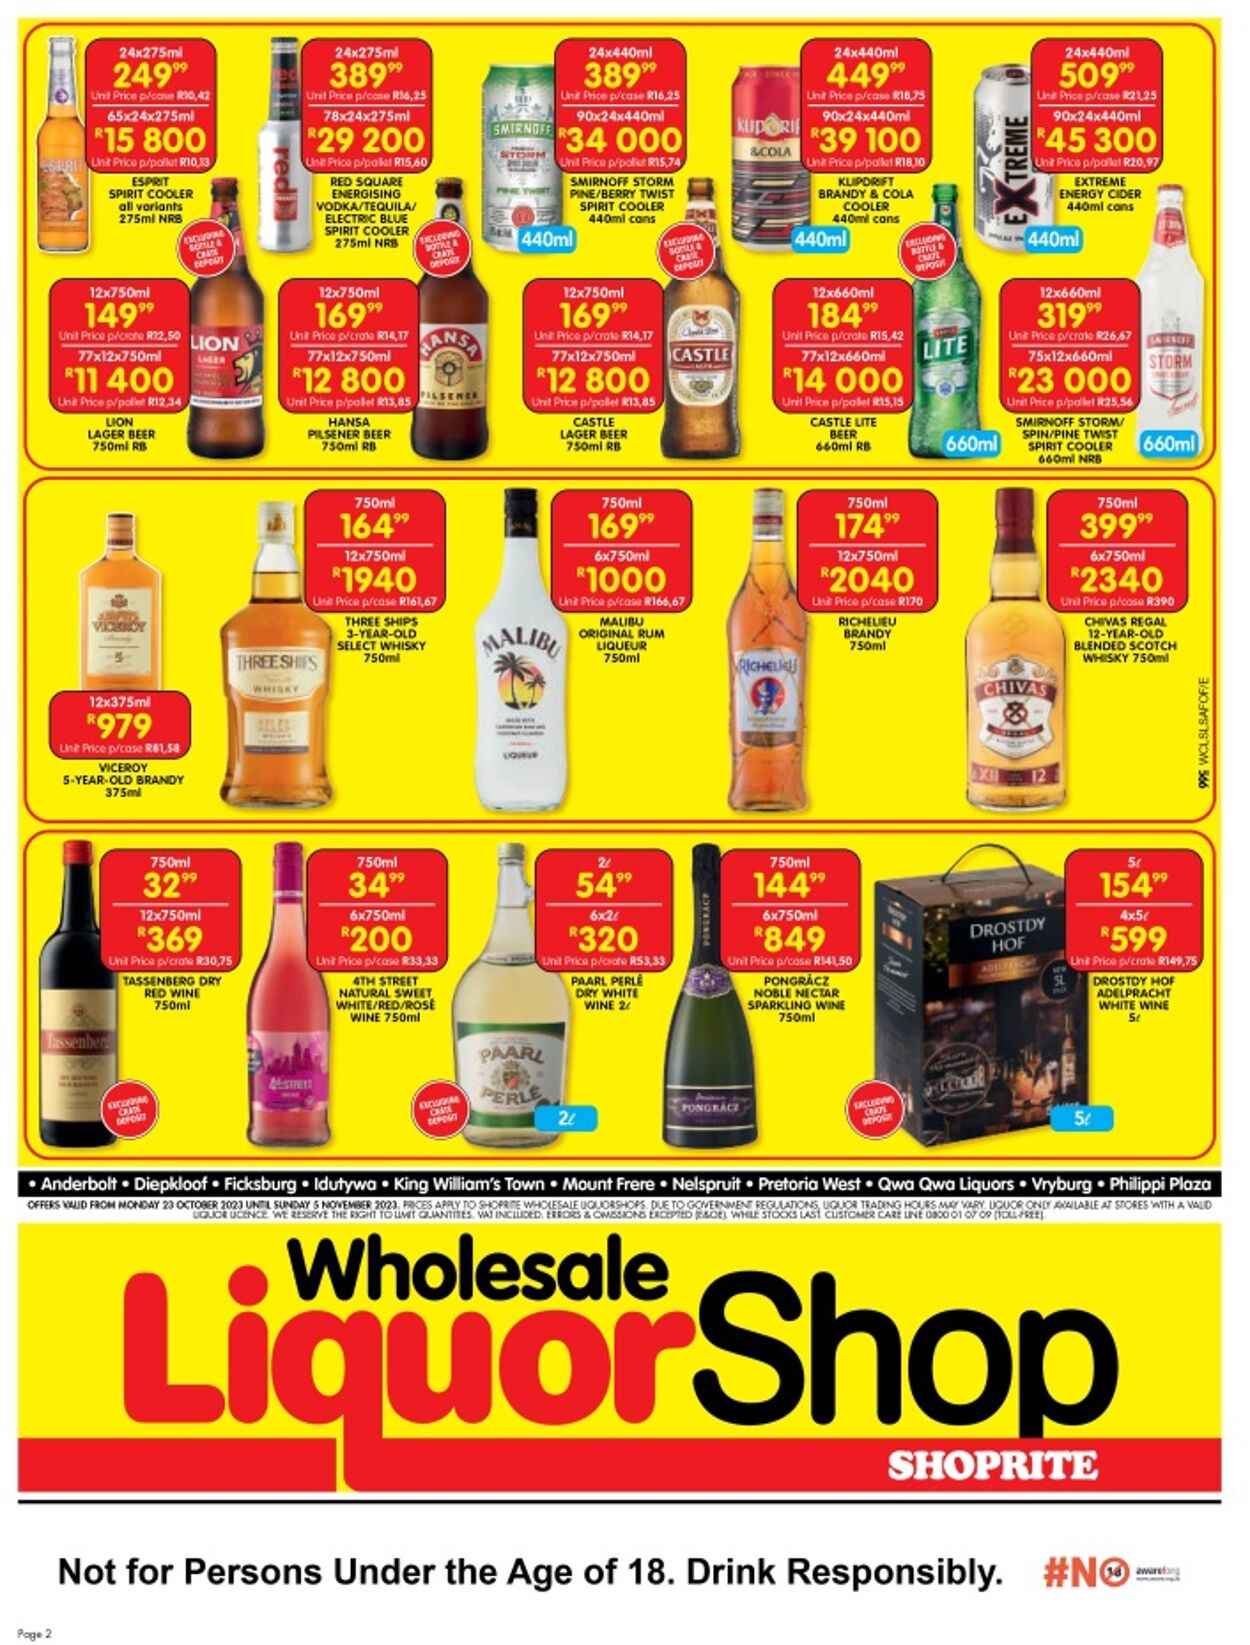 Shoprite Catalogue from 2023/11/23